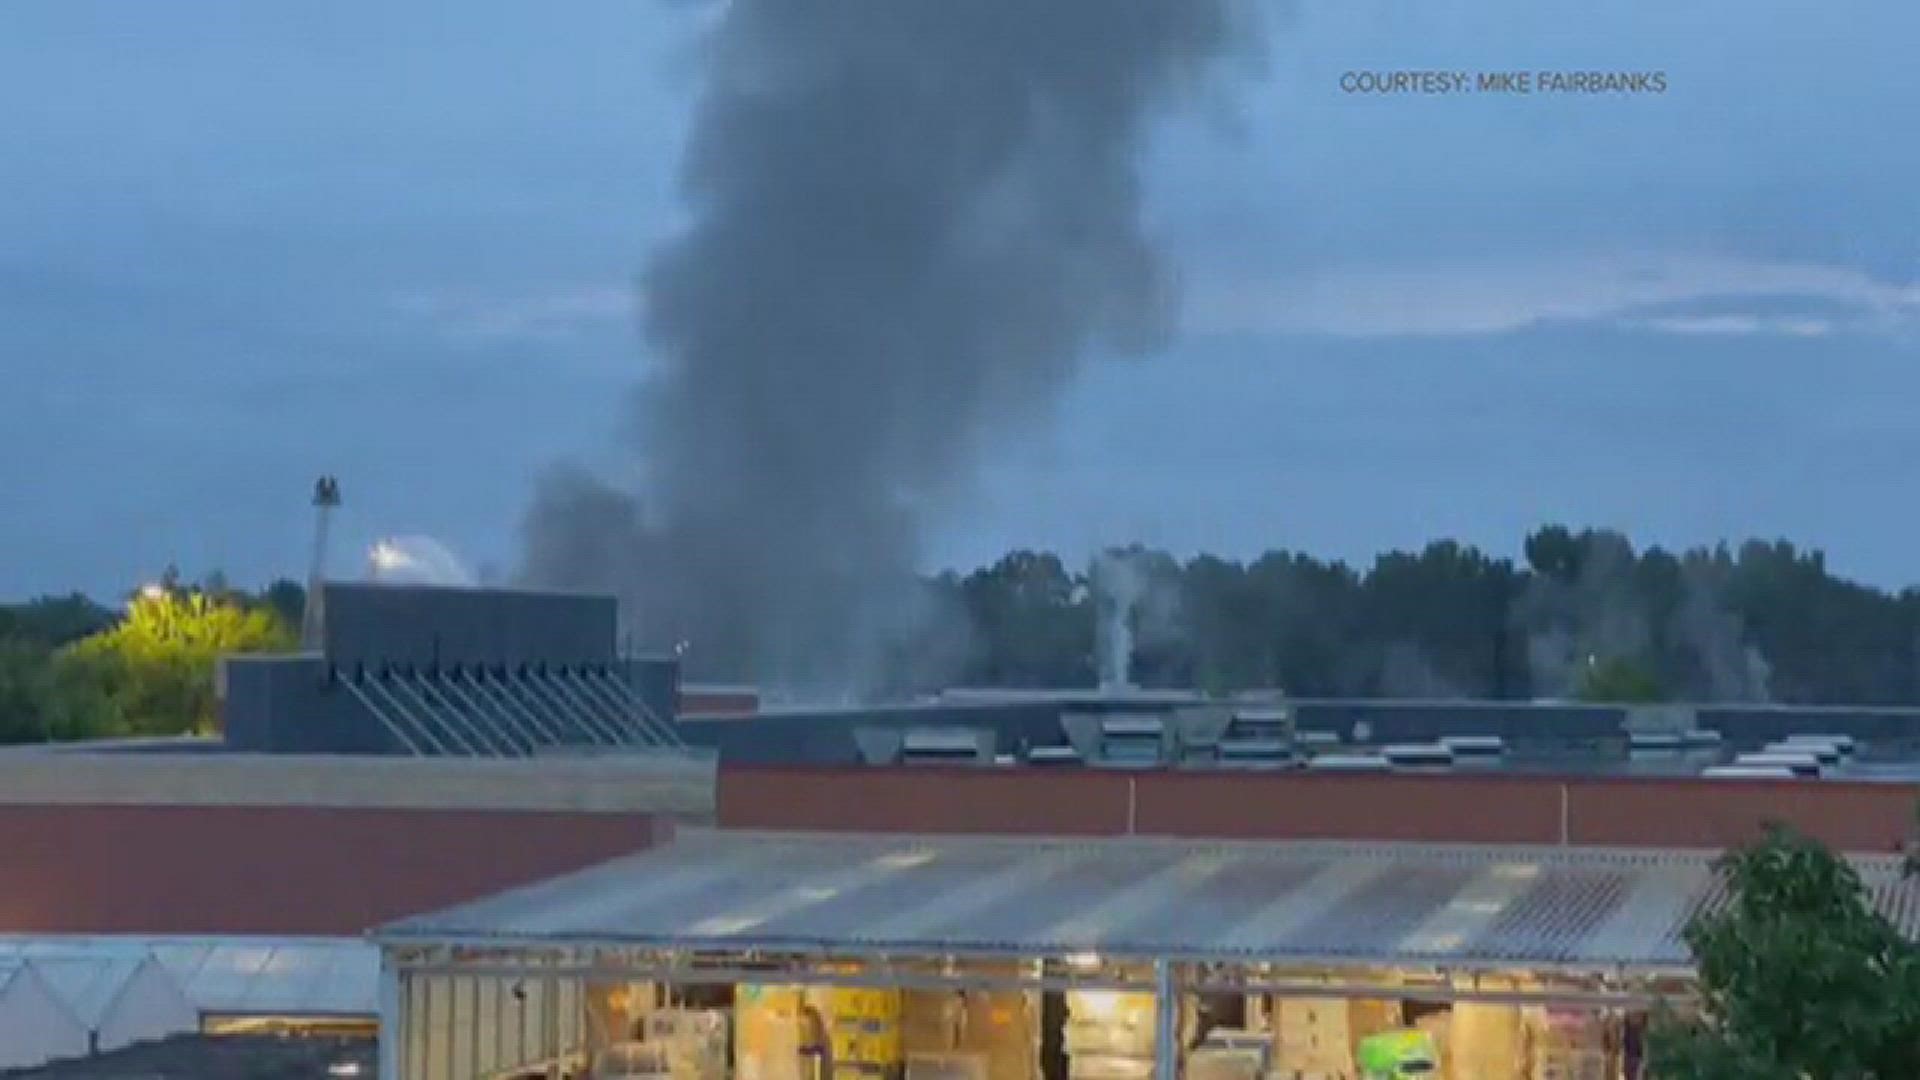 Crews are working to contain a fire at the Walmart in Peachtree City Wednesday evening.